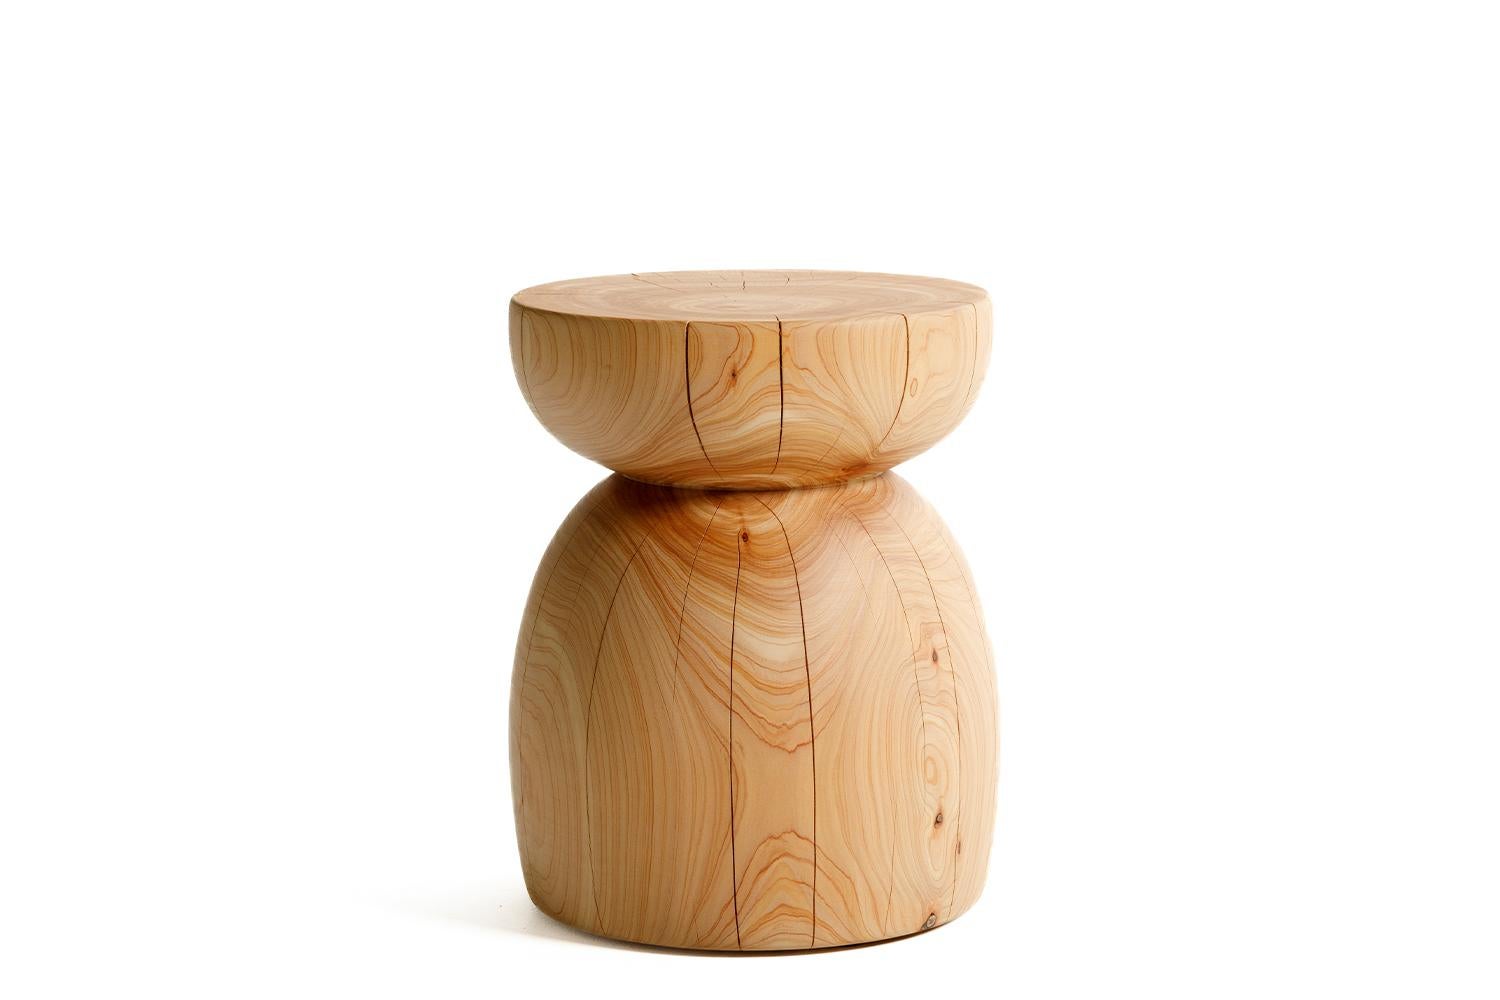 The Origin is a sculptural modern organic side table turned from a solid block of macrocarpa (Monterey Cypress). The wood is finished with a hand rubbed, low V.O.C., natural plant oils to bring the gorgeous grain to life. 

We make timber furniture